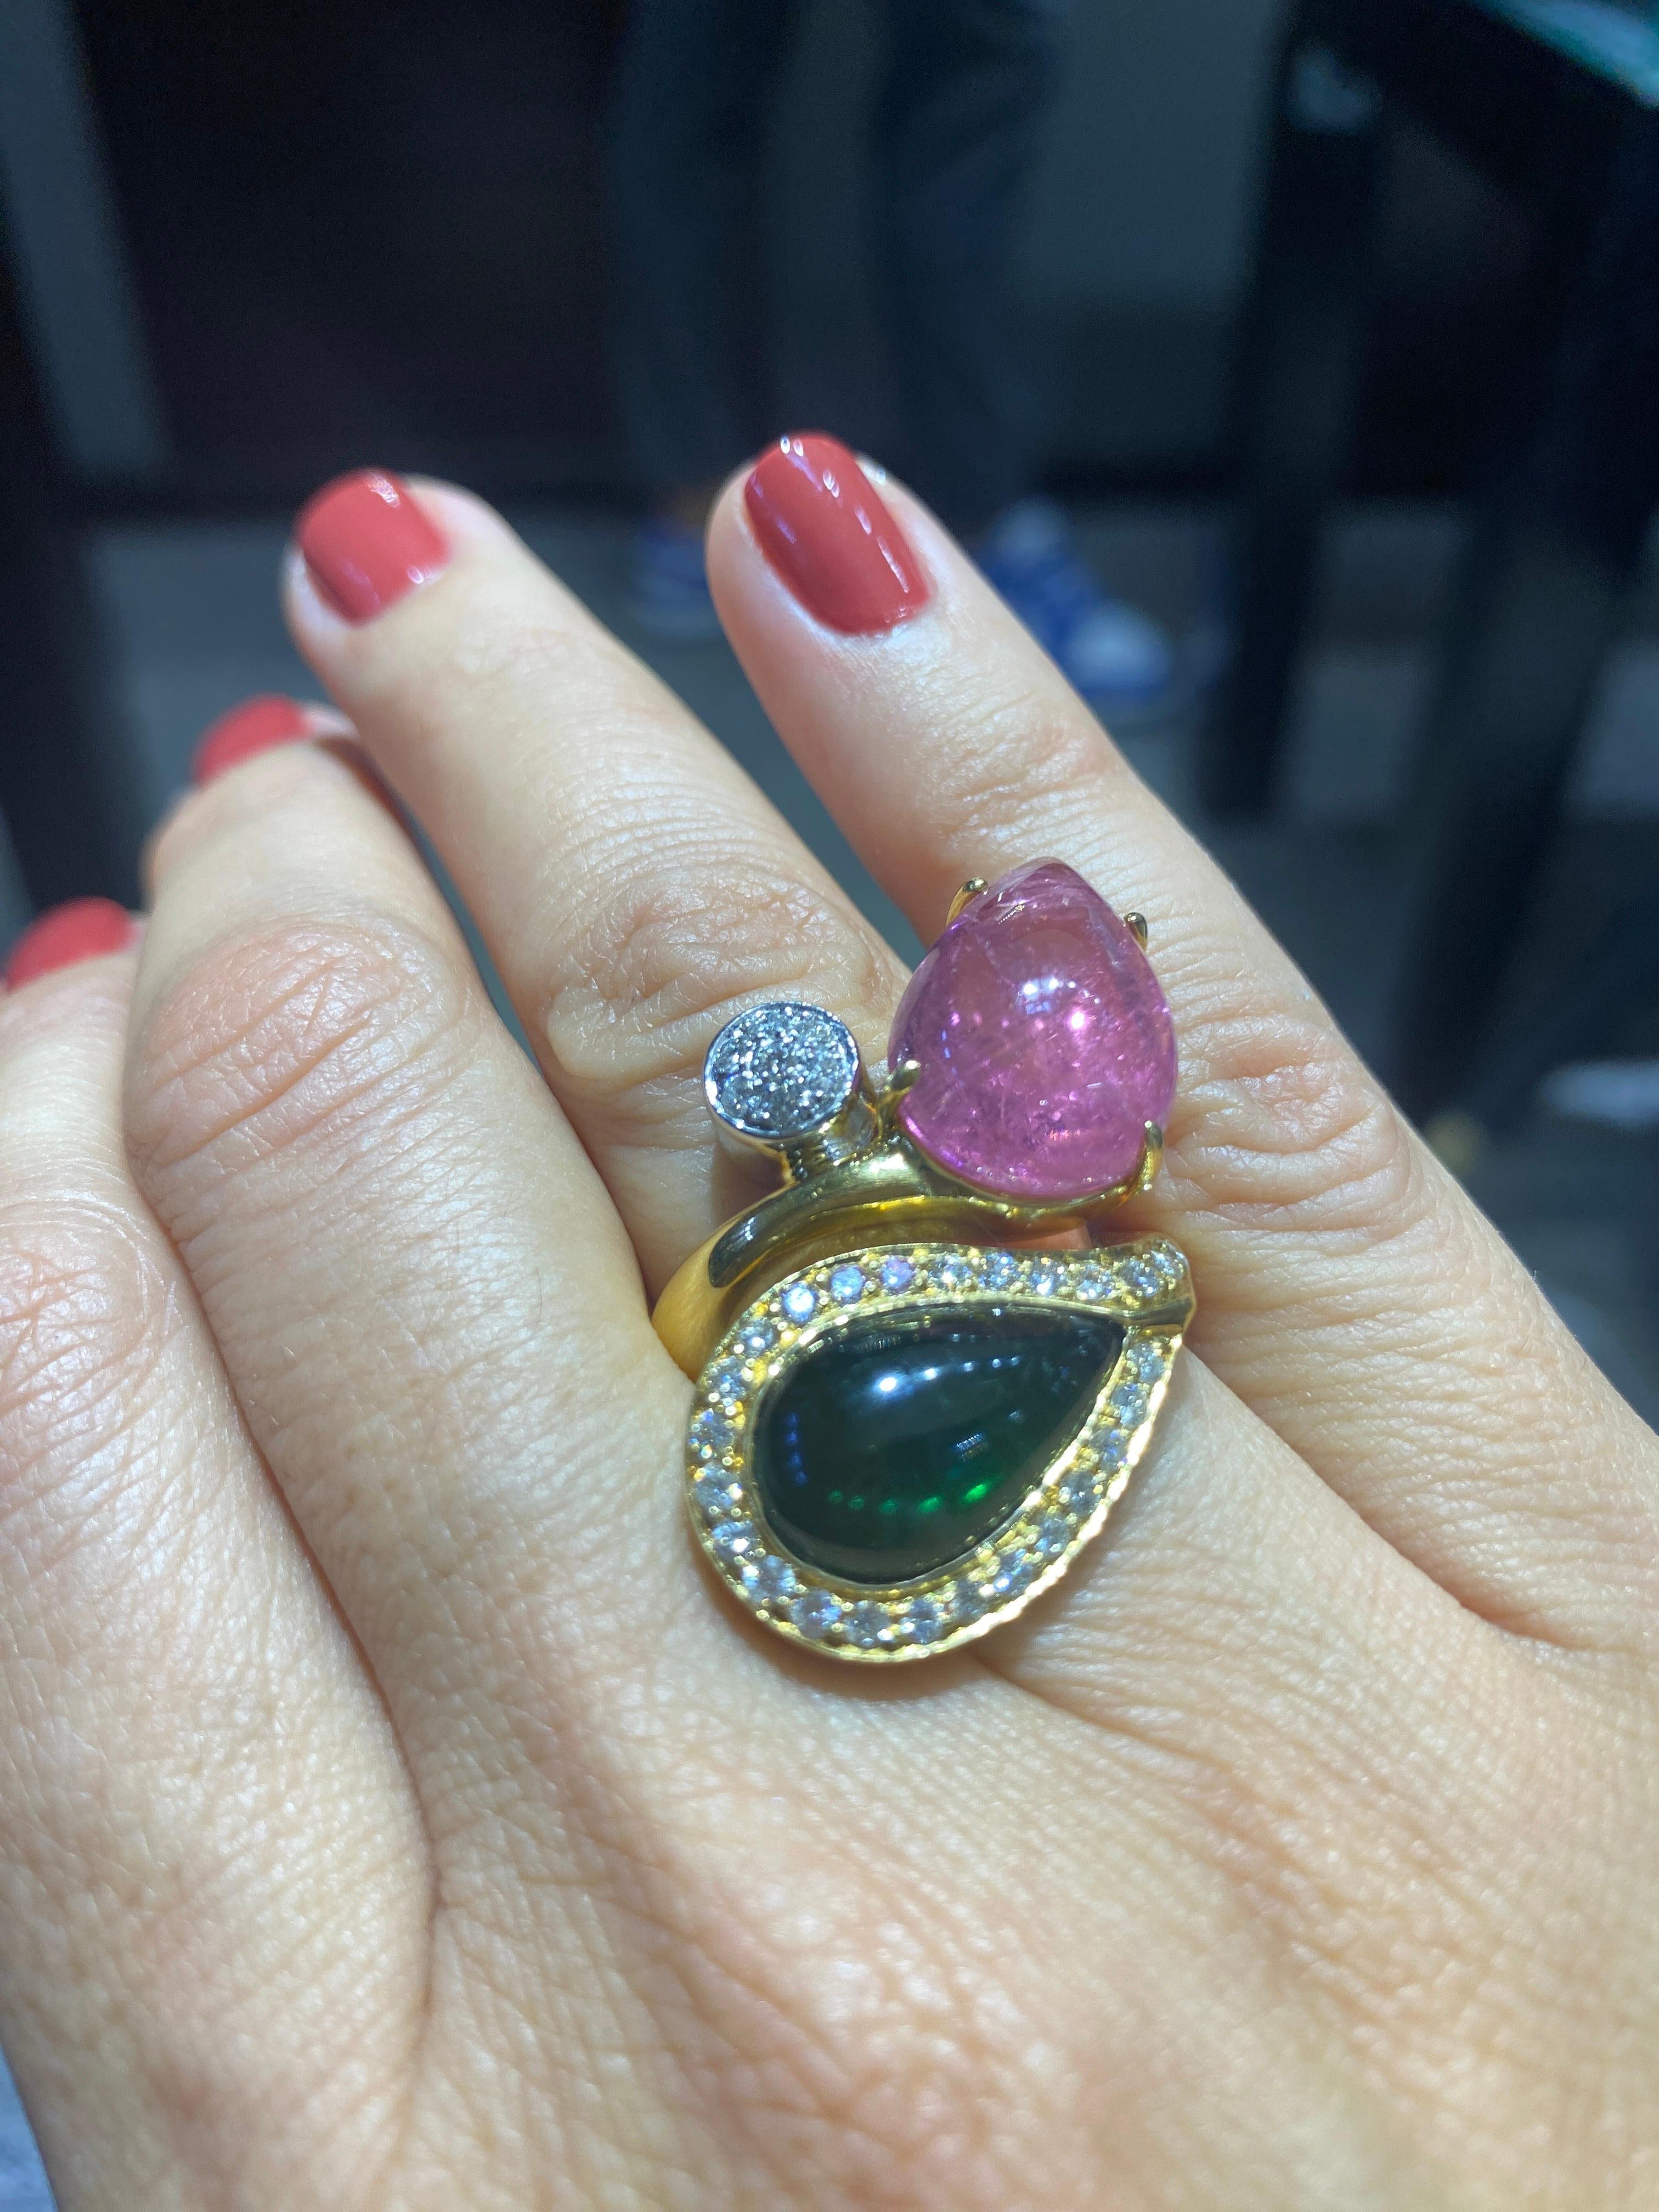 This remarkable piece by Bulgari is a most striking design consisting of 18 carat gold, diamonds and the Bulgari classics coloured tourmalines. 2 large drop shaped tourmalines, one deep green, the other a delightful pink colour are adorned with